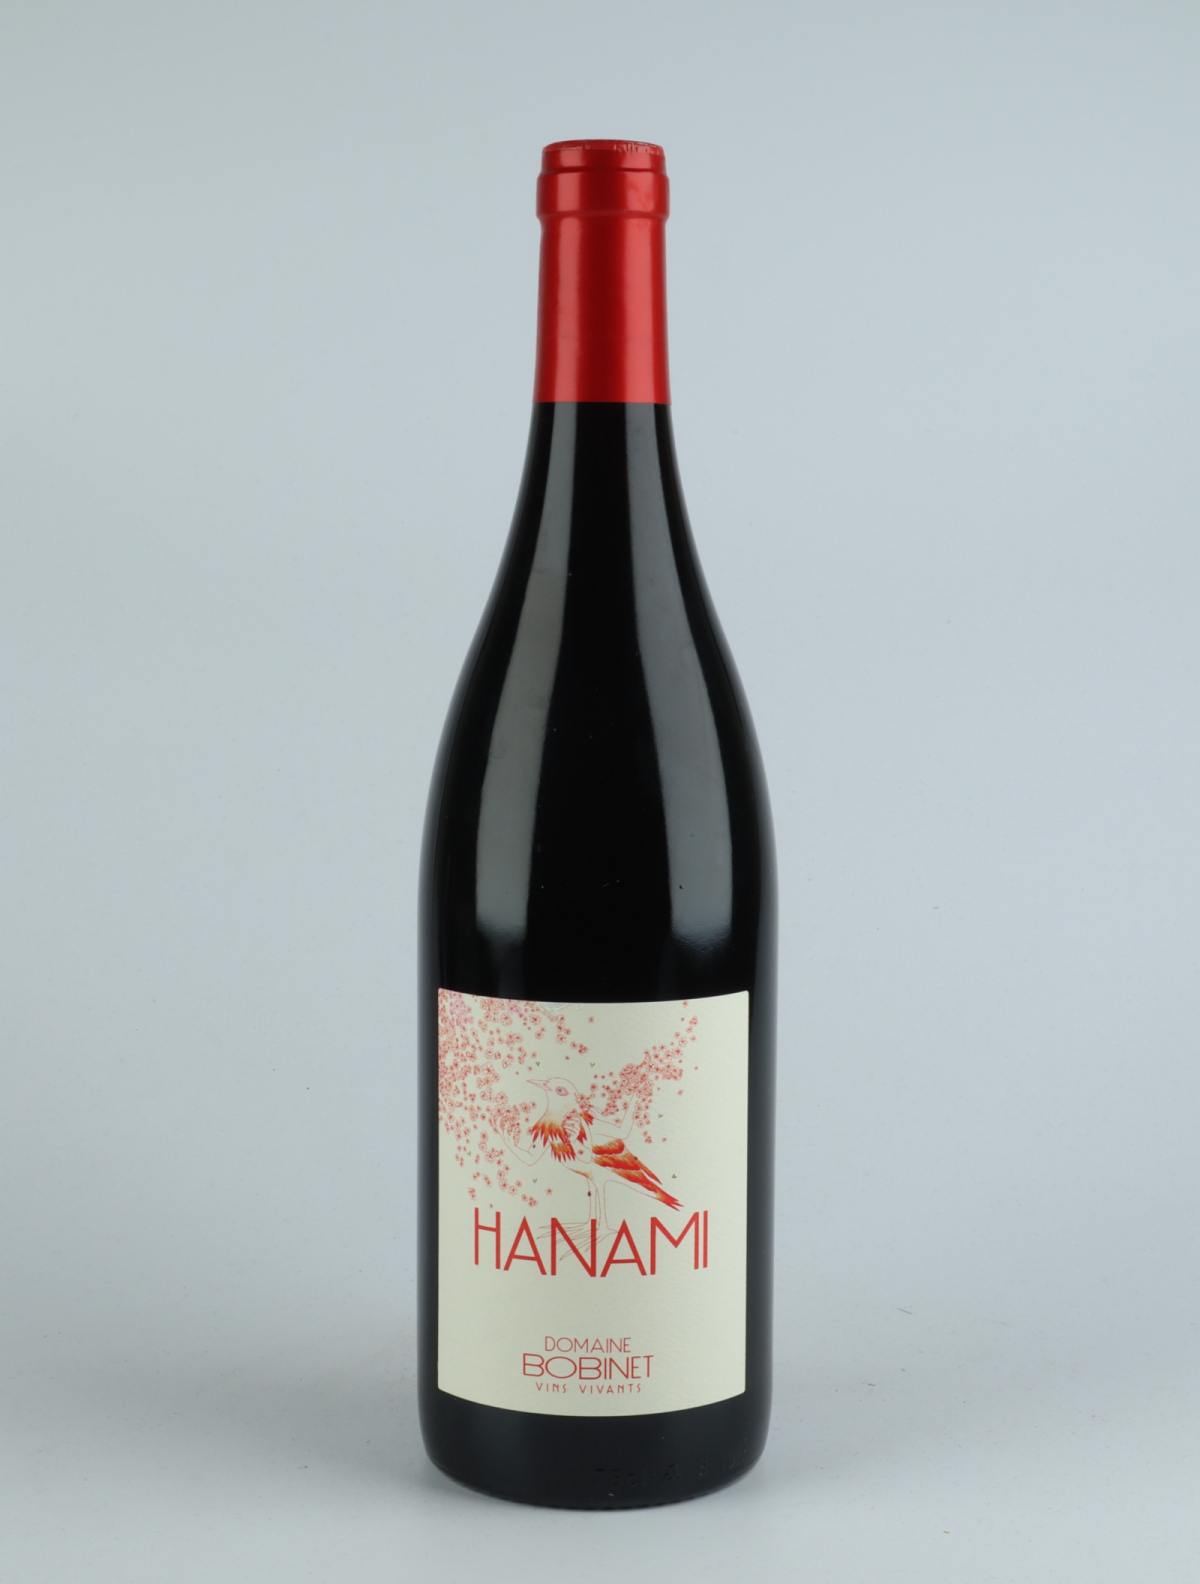 A bottle 2020 Saumur Rouge - Hanami Red wine from Domaine Bobinet, Loire in France